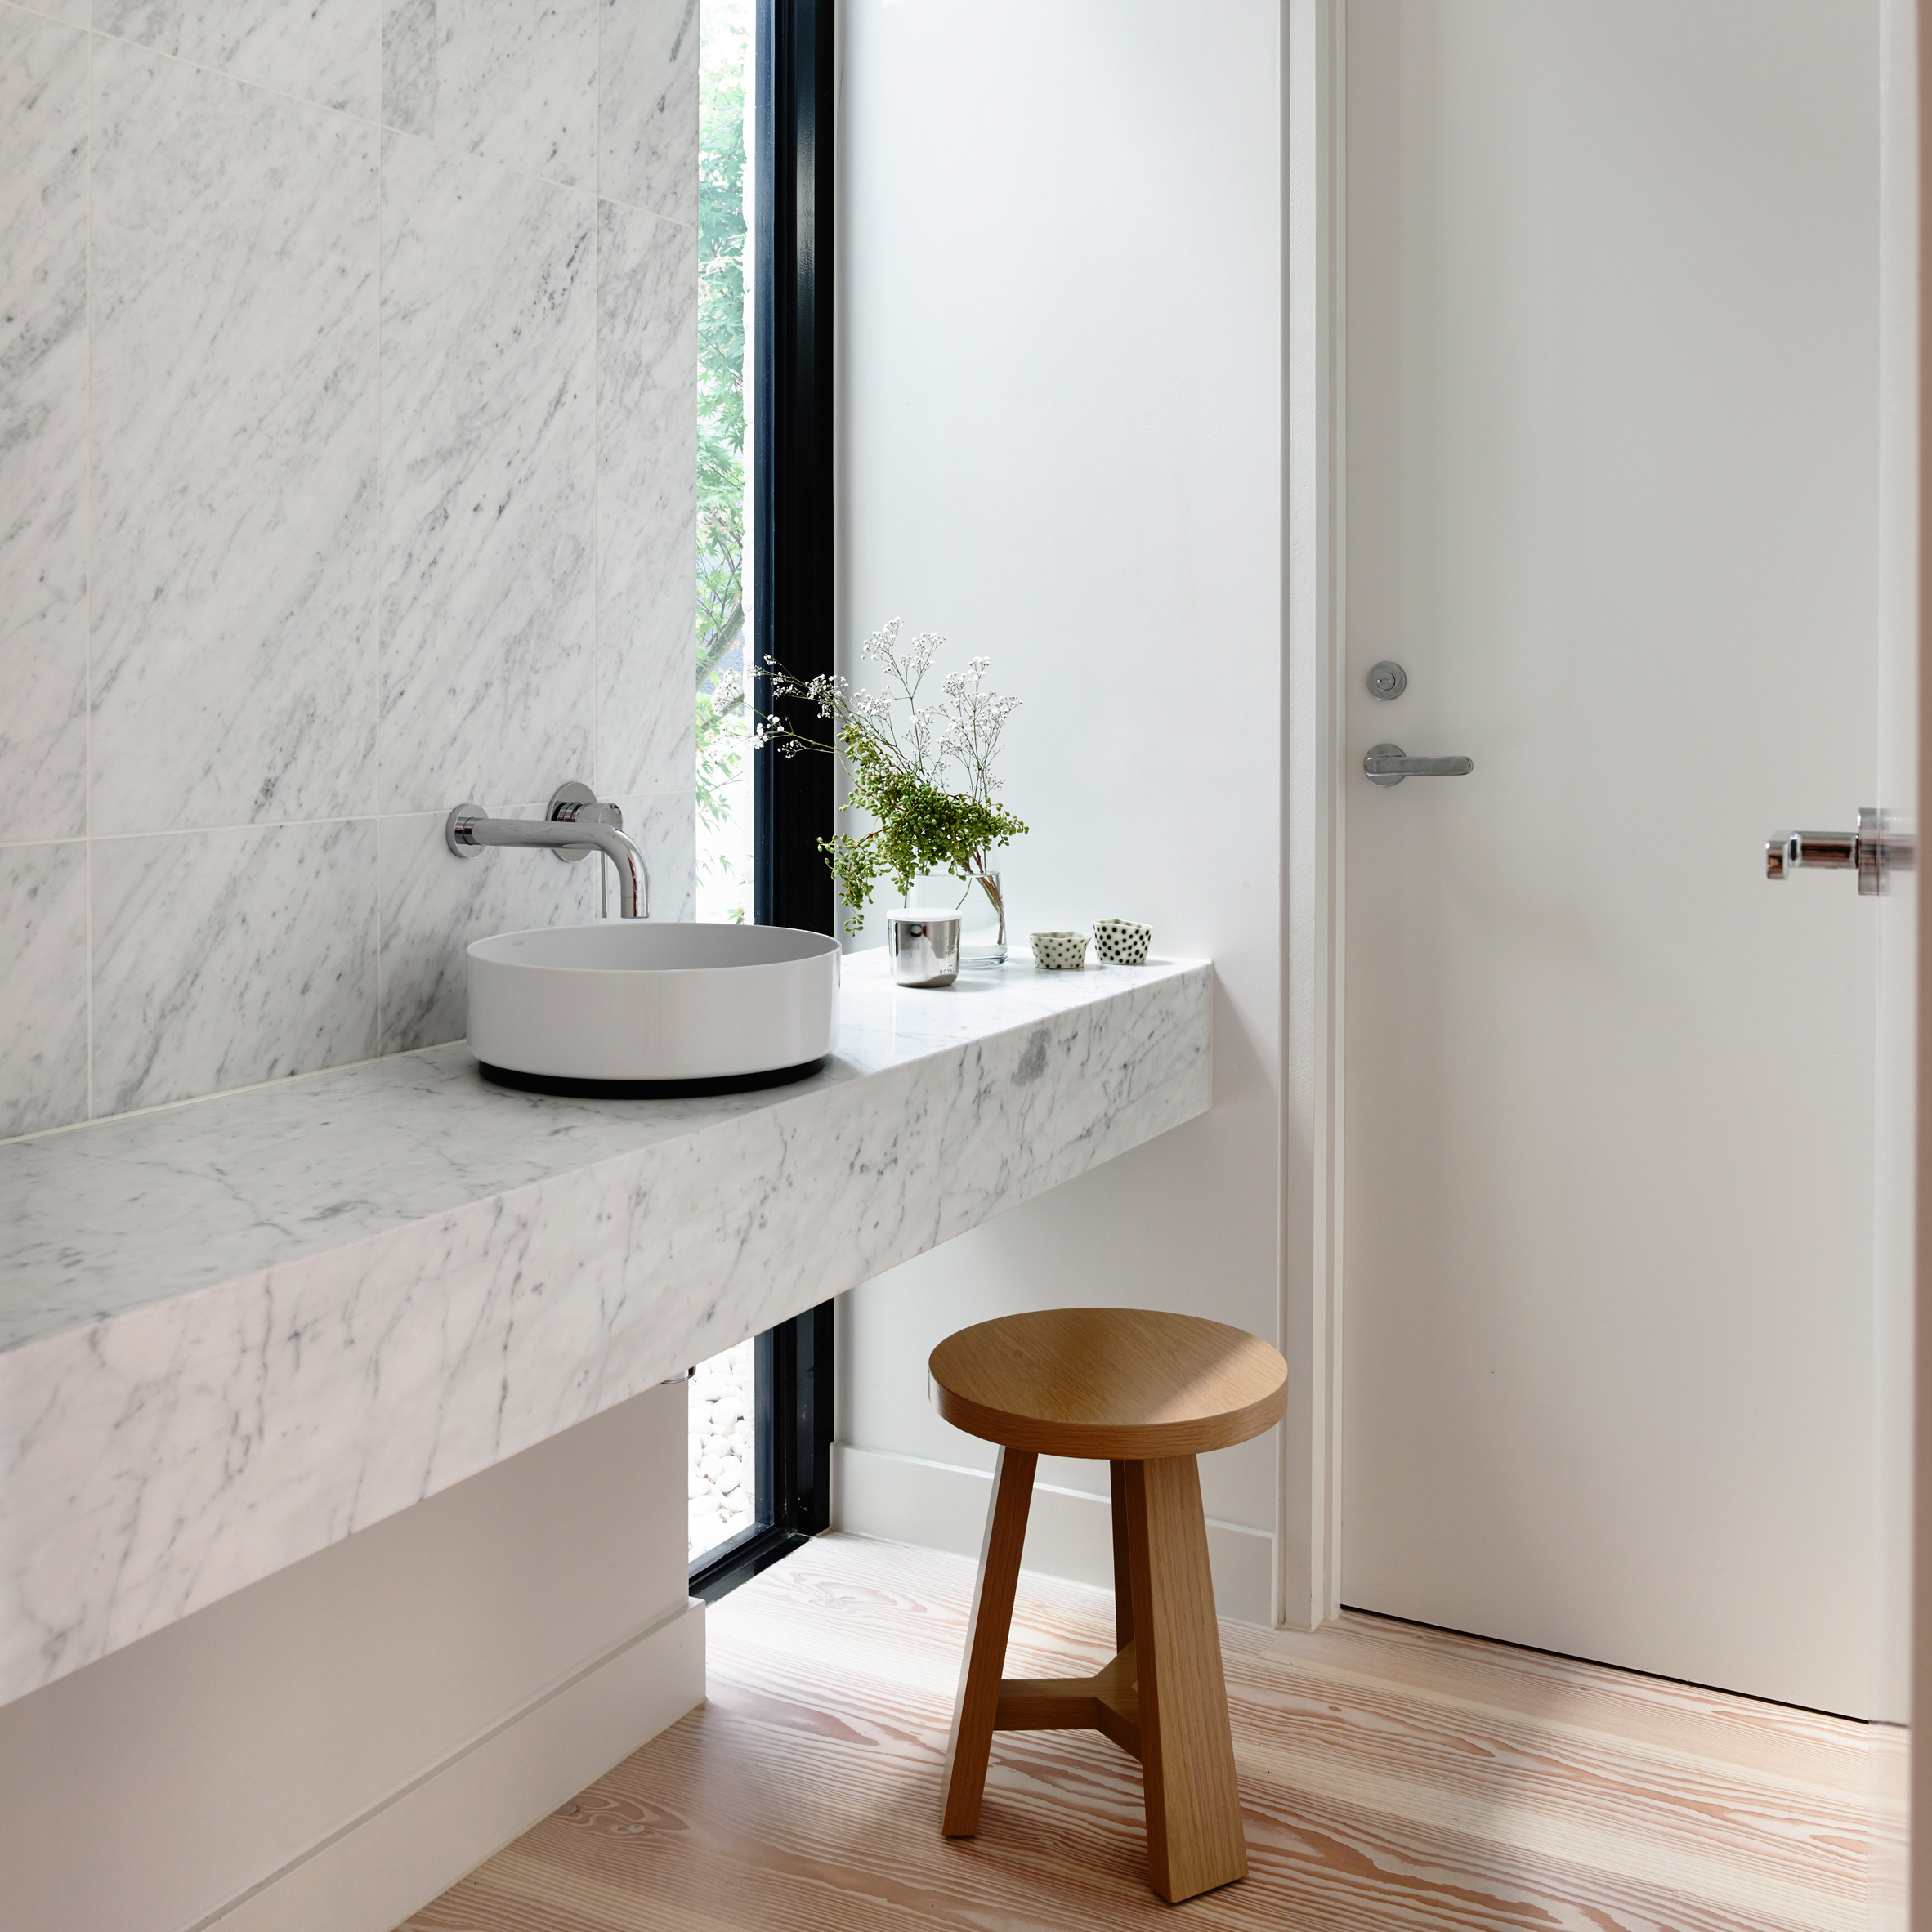 Fairbairn House in Melbourne is one of the 10 most popular marble interiors on Pinterest